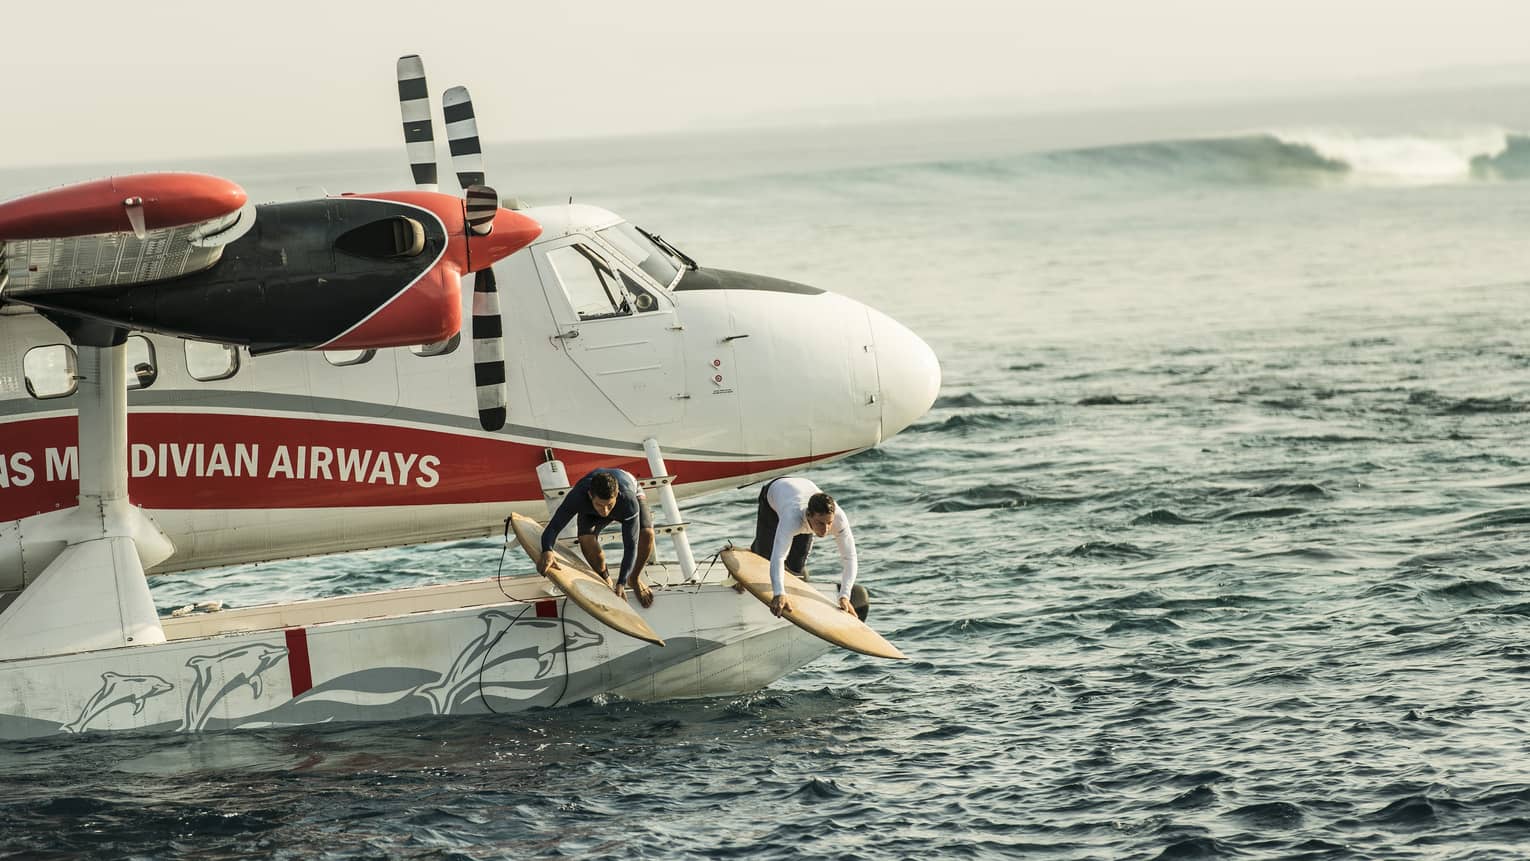 Two people with surfboards jump from float plane onto waves